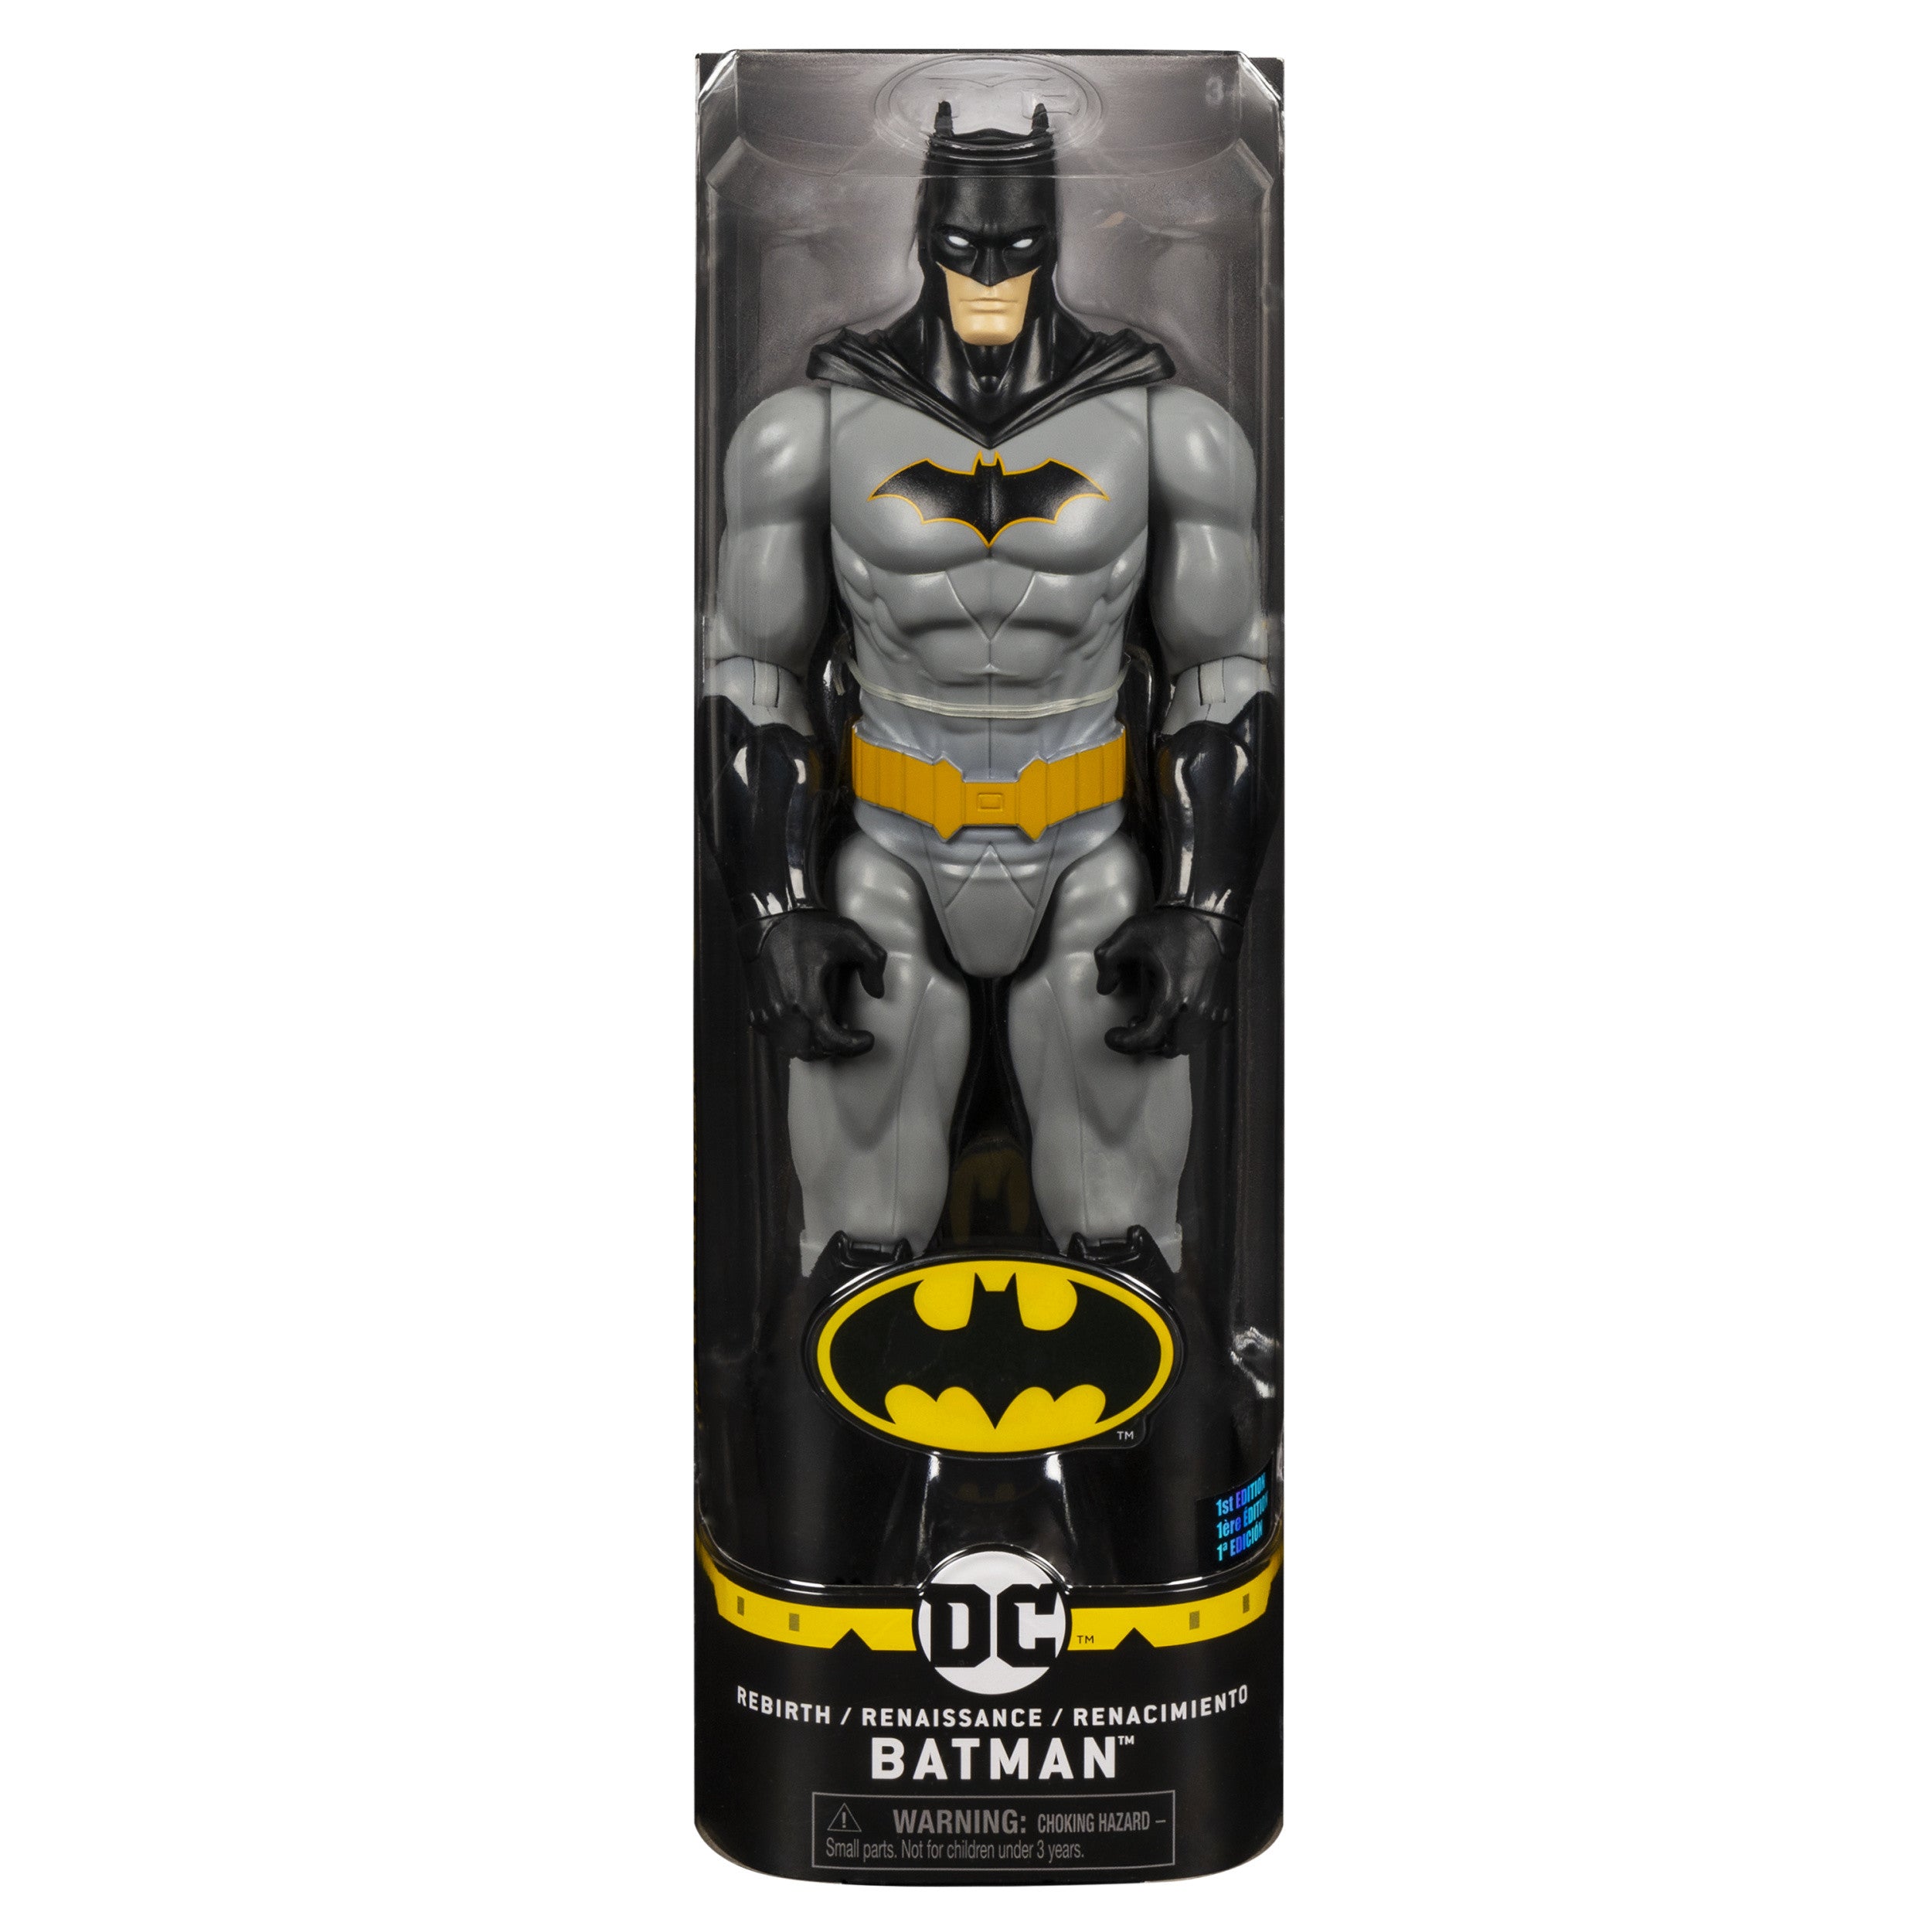 SPIN MASTER - DC Comics Batman 12-inch Rebirth Action Figure, Kids Toys for Boys Aged 3 and up